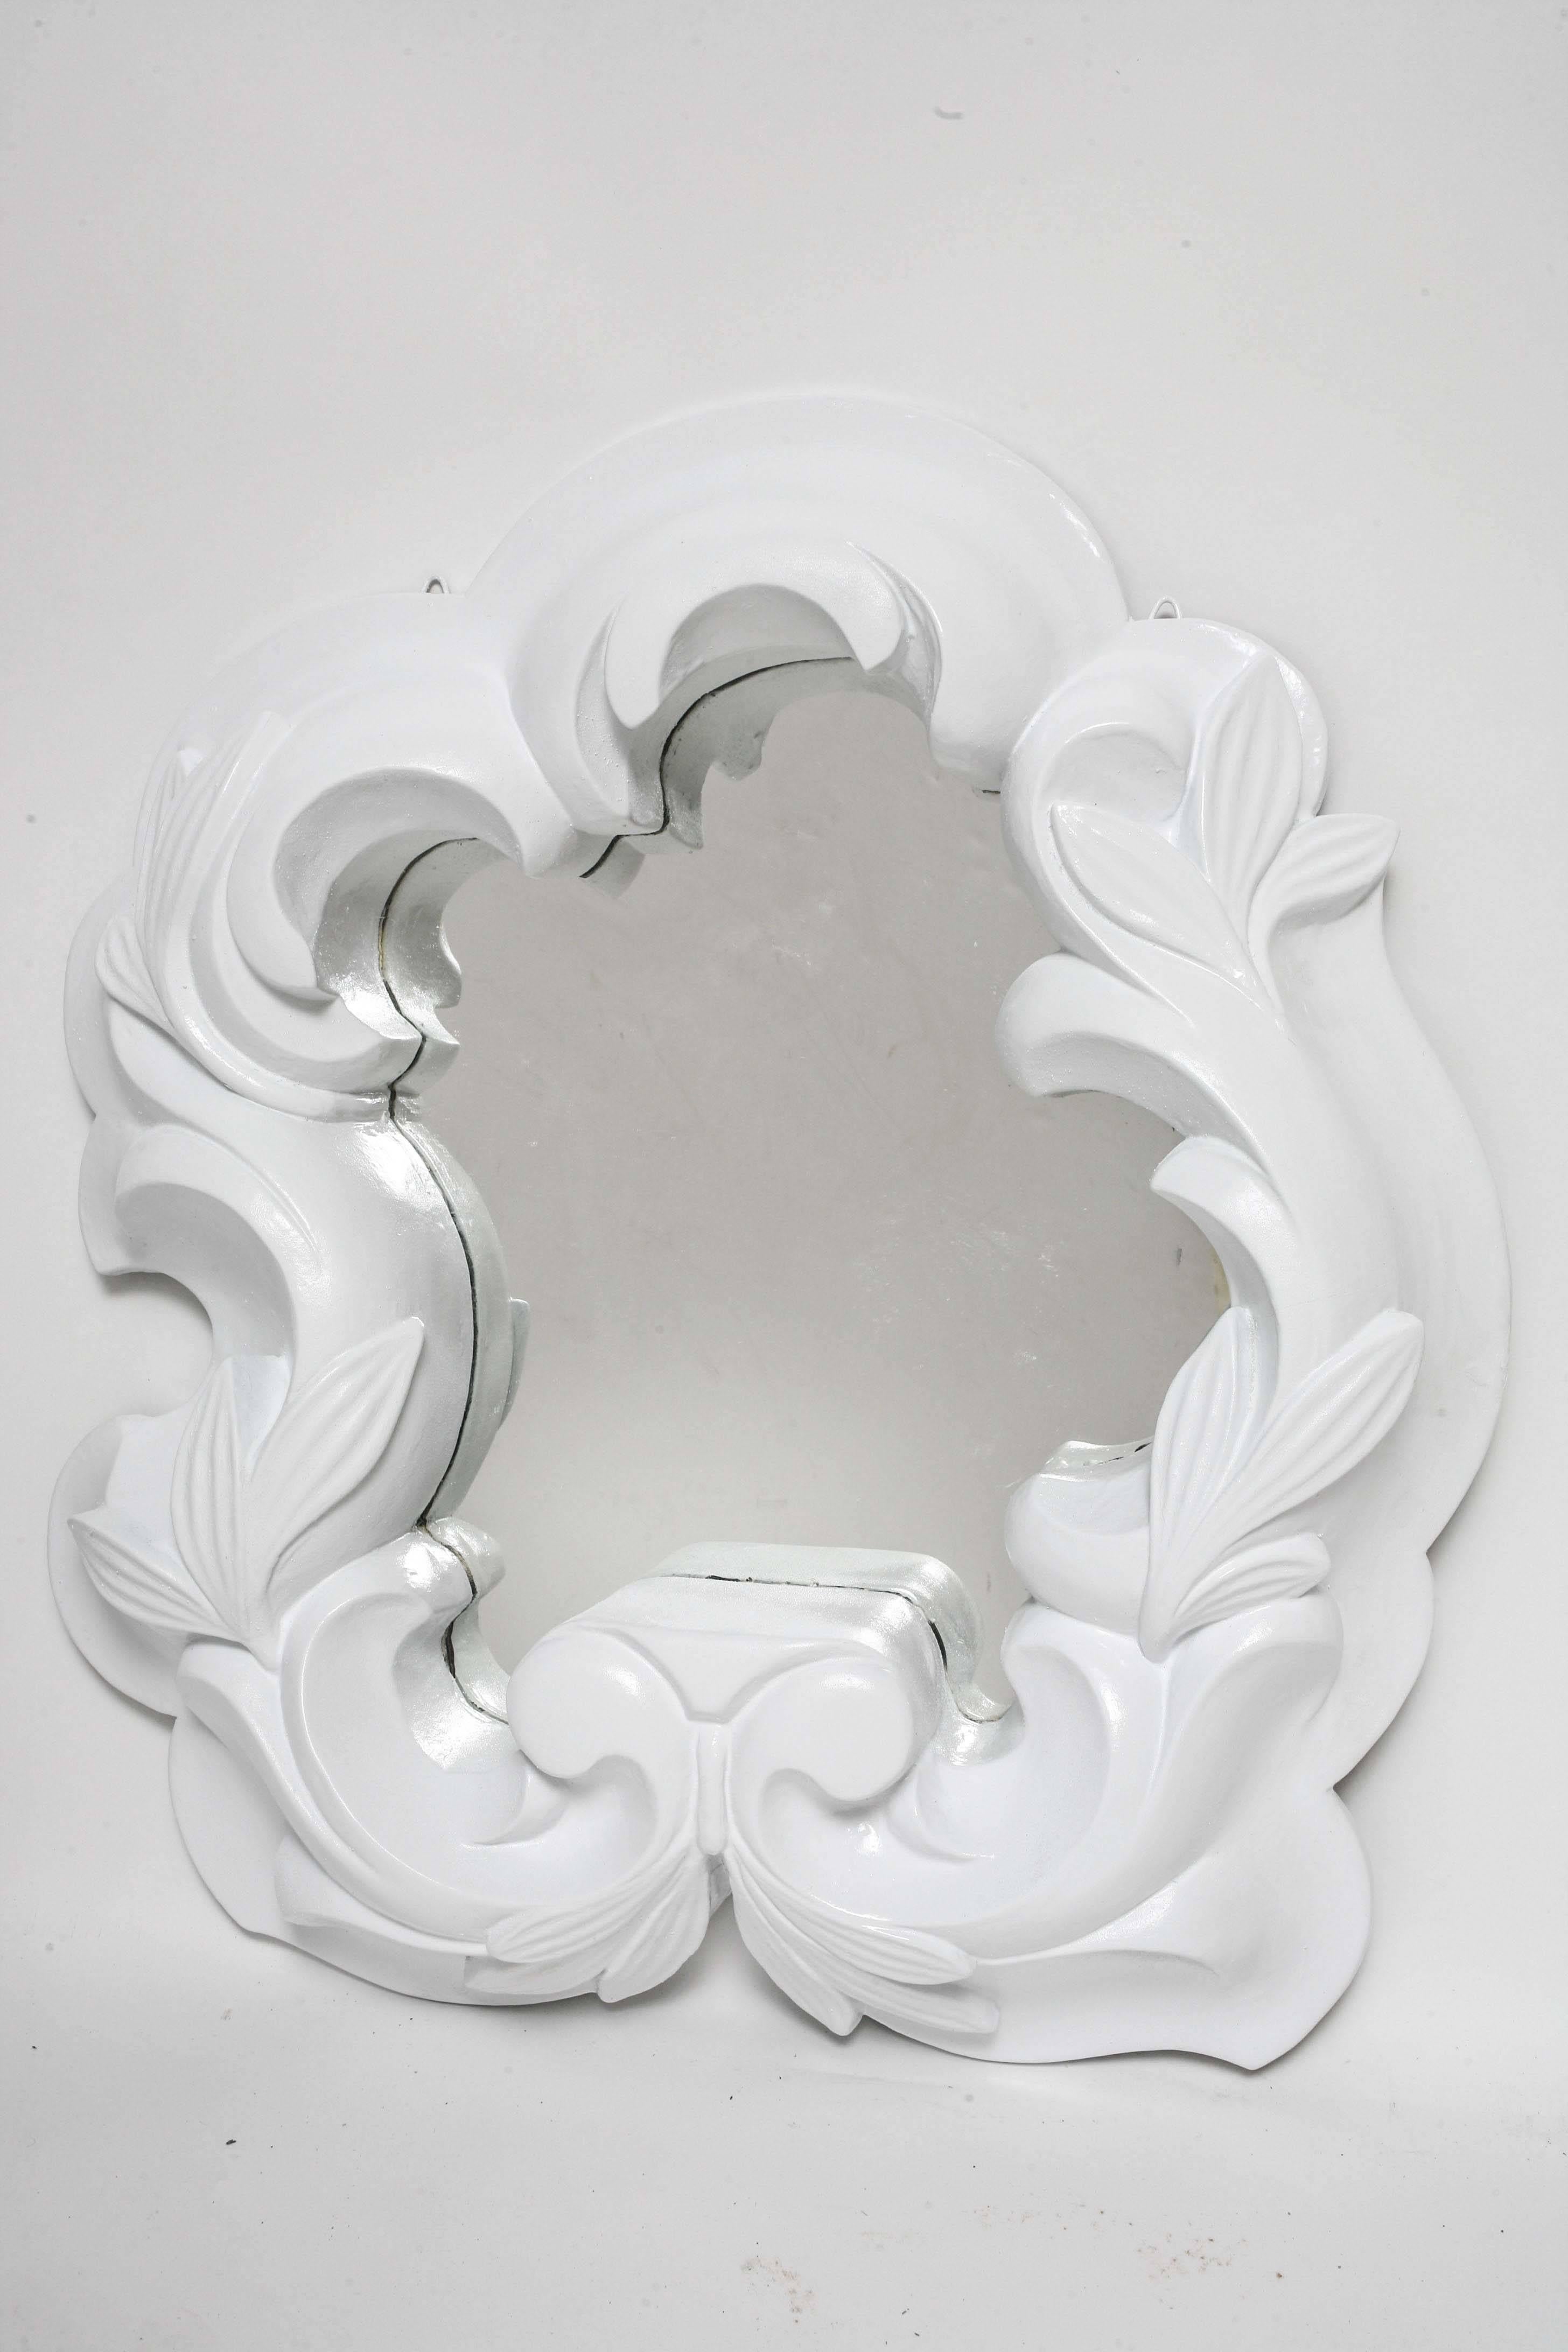 Made of plaster with painted finish, this mirror epitomizes that glam look. Mirror has been replaced, so no age spots.